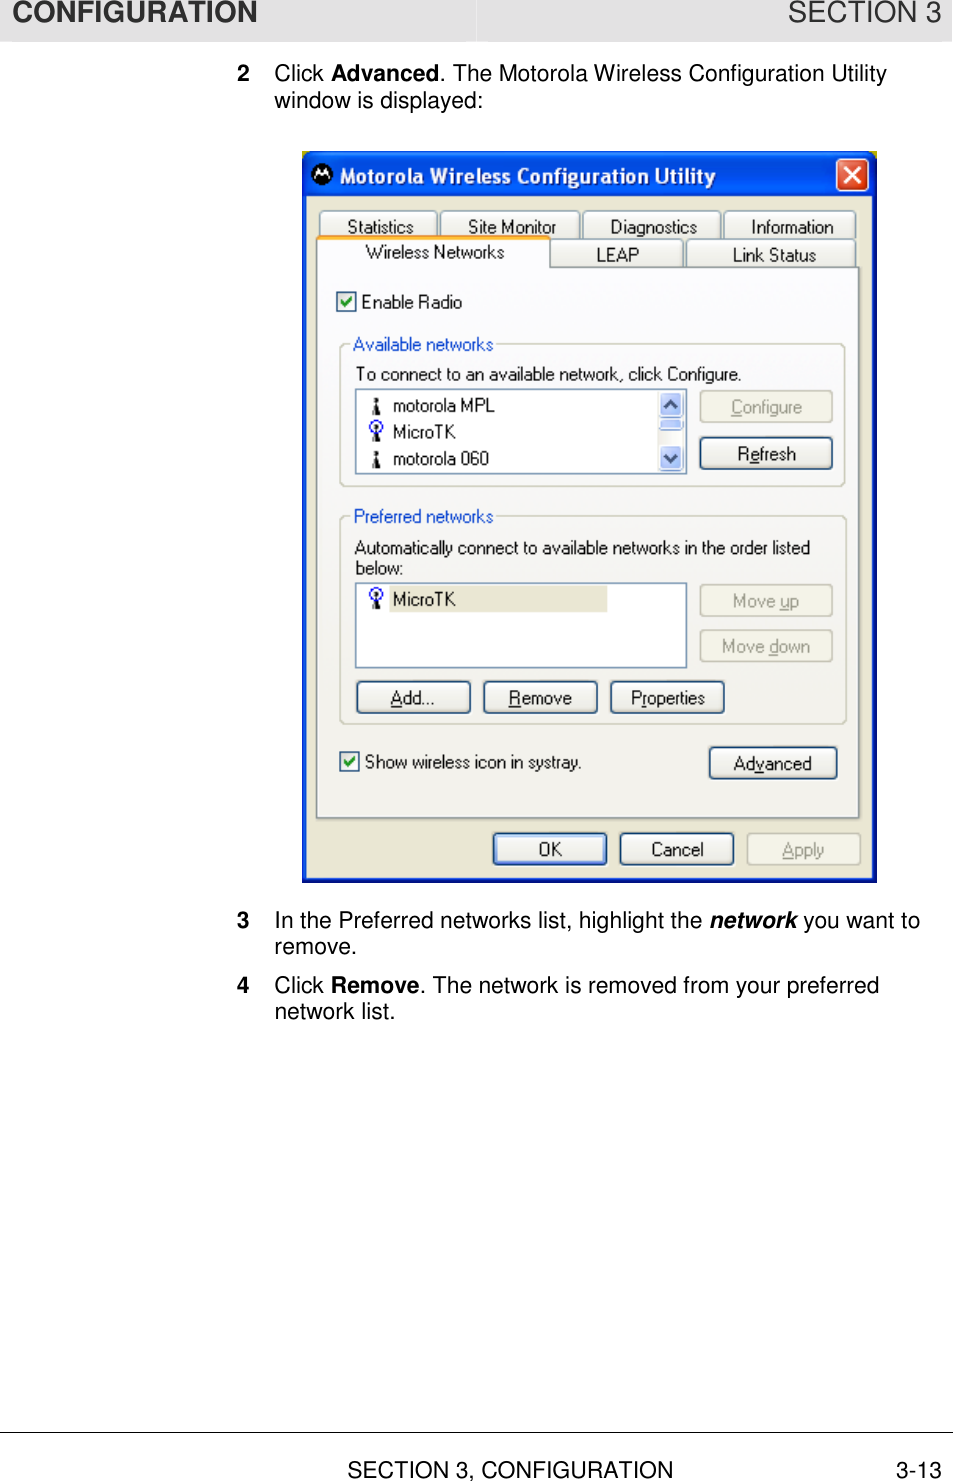 CONFIGURATION SECTION 3   SECTION 3, CONFIGURATION  3-13 2  Click Advanced. The Motorola Wireless Configuration Utility window is displayed:  3  In the Preferred networks list, highlight the network you want to remove. 4  Click Remove. The network is removed from your preferred network list. 